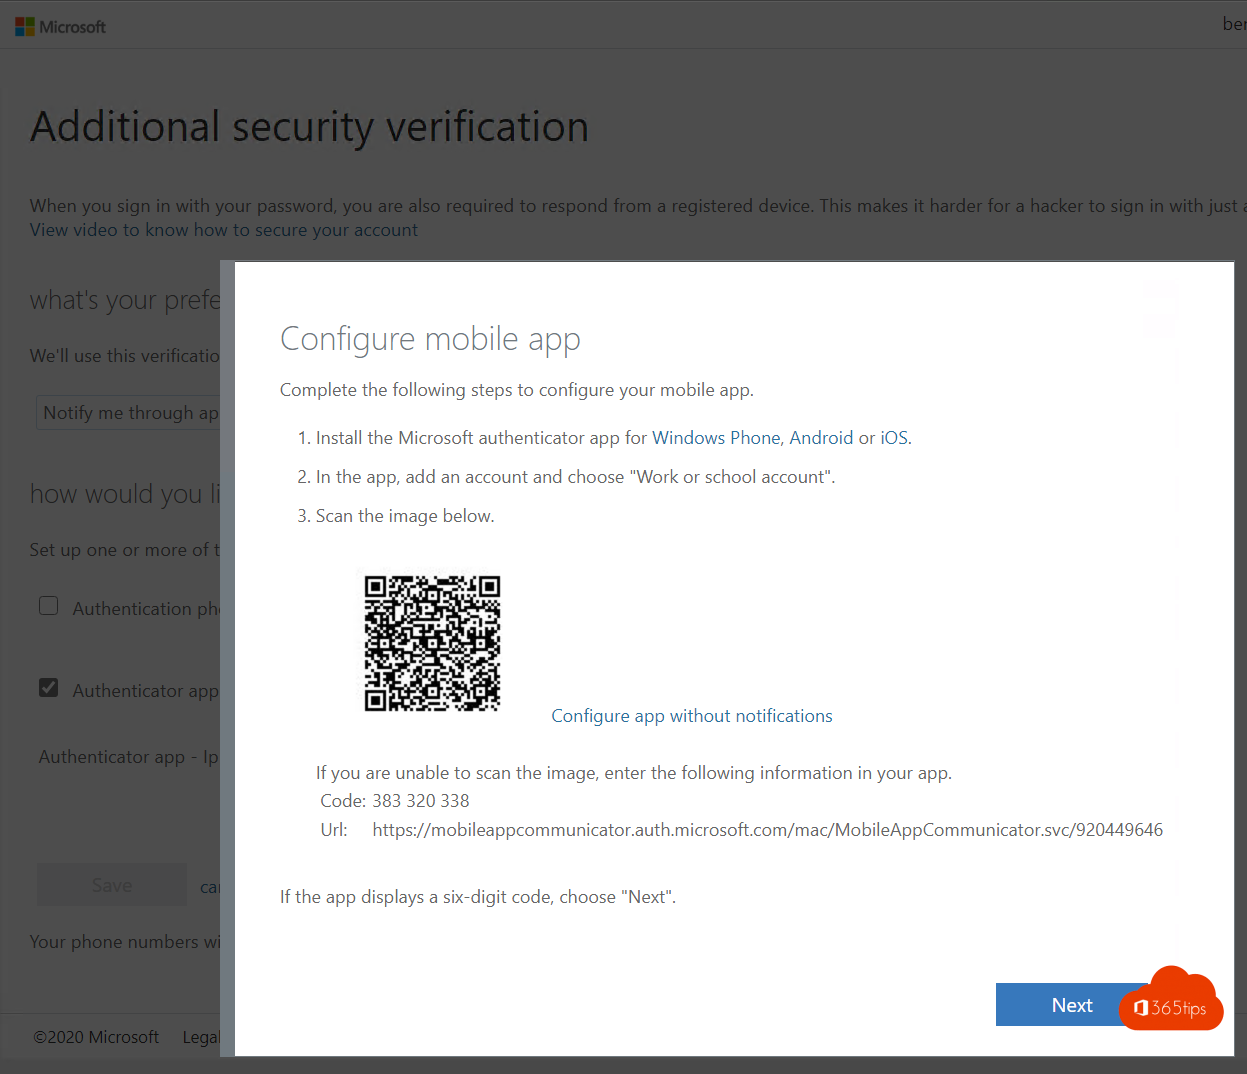 How do I activate Multi-Factor Authentication (MFA) in Microsoft Office 365?